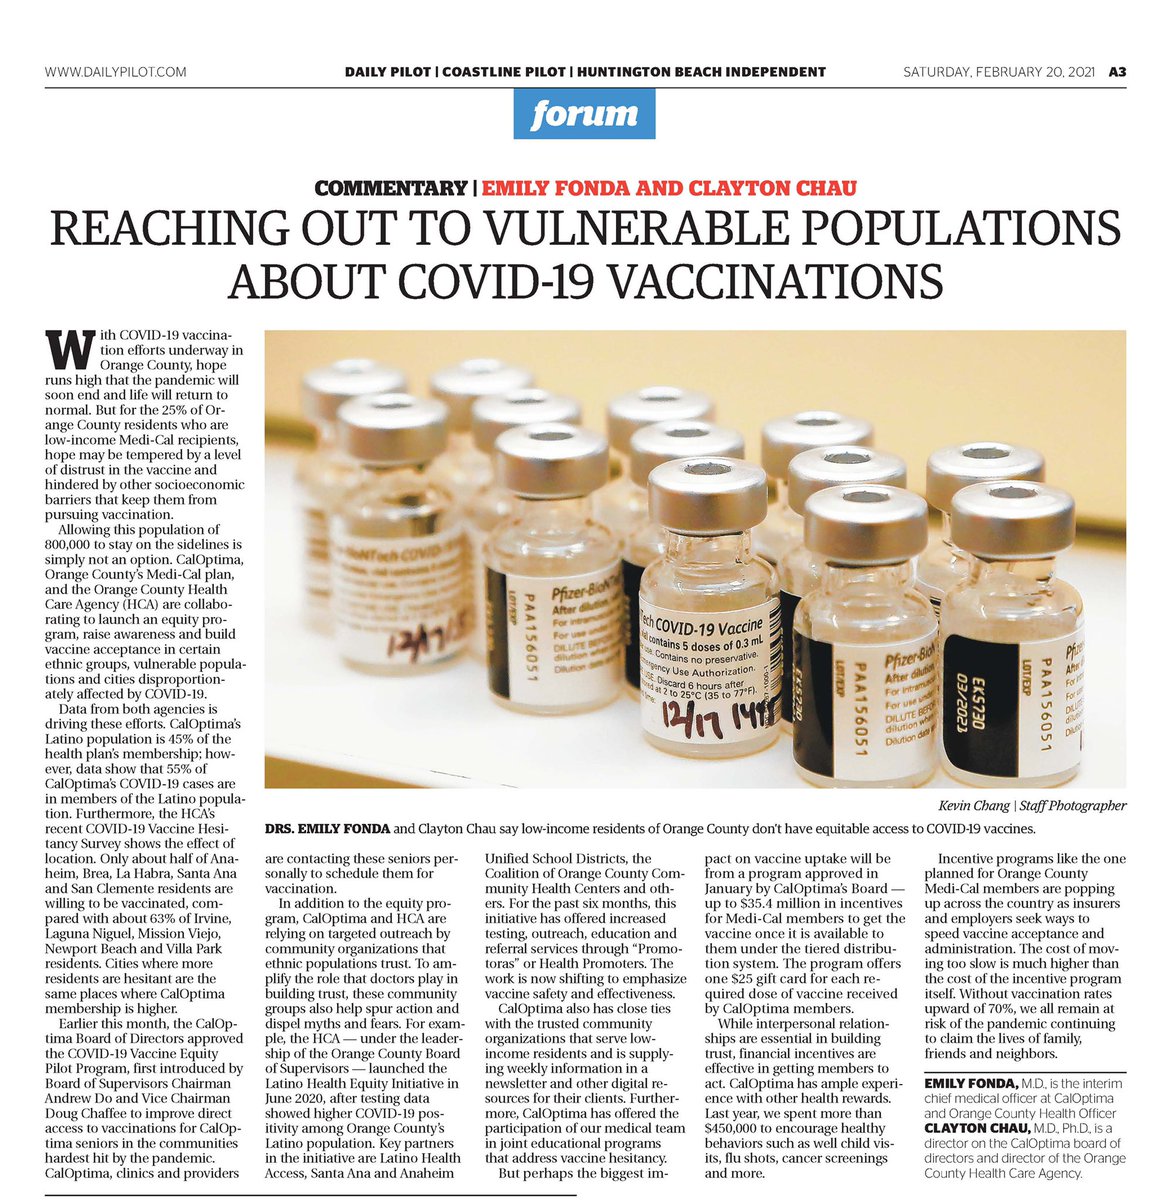 Some thoughts from our @OCGovCA Health Officer Dr. Clayton Chau and @CalOptima’s Interim Chief Medical Officer Dr. Emily Fonda regarding reaching out to vulnerable populations about #OCCOVID19 vaccinations (from the @TheDailyPilot).